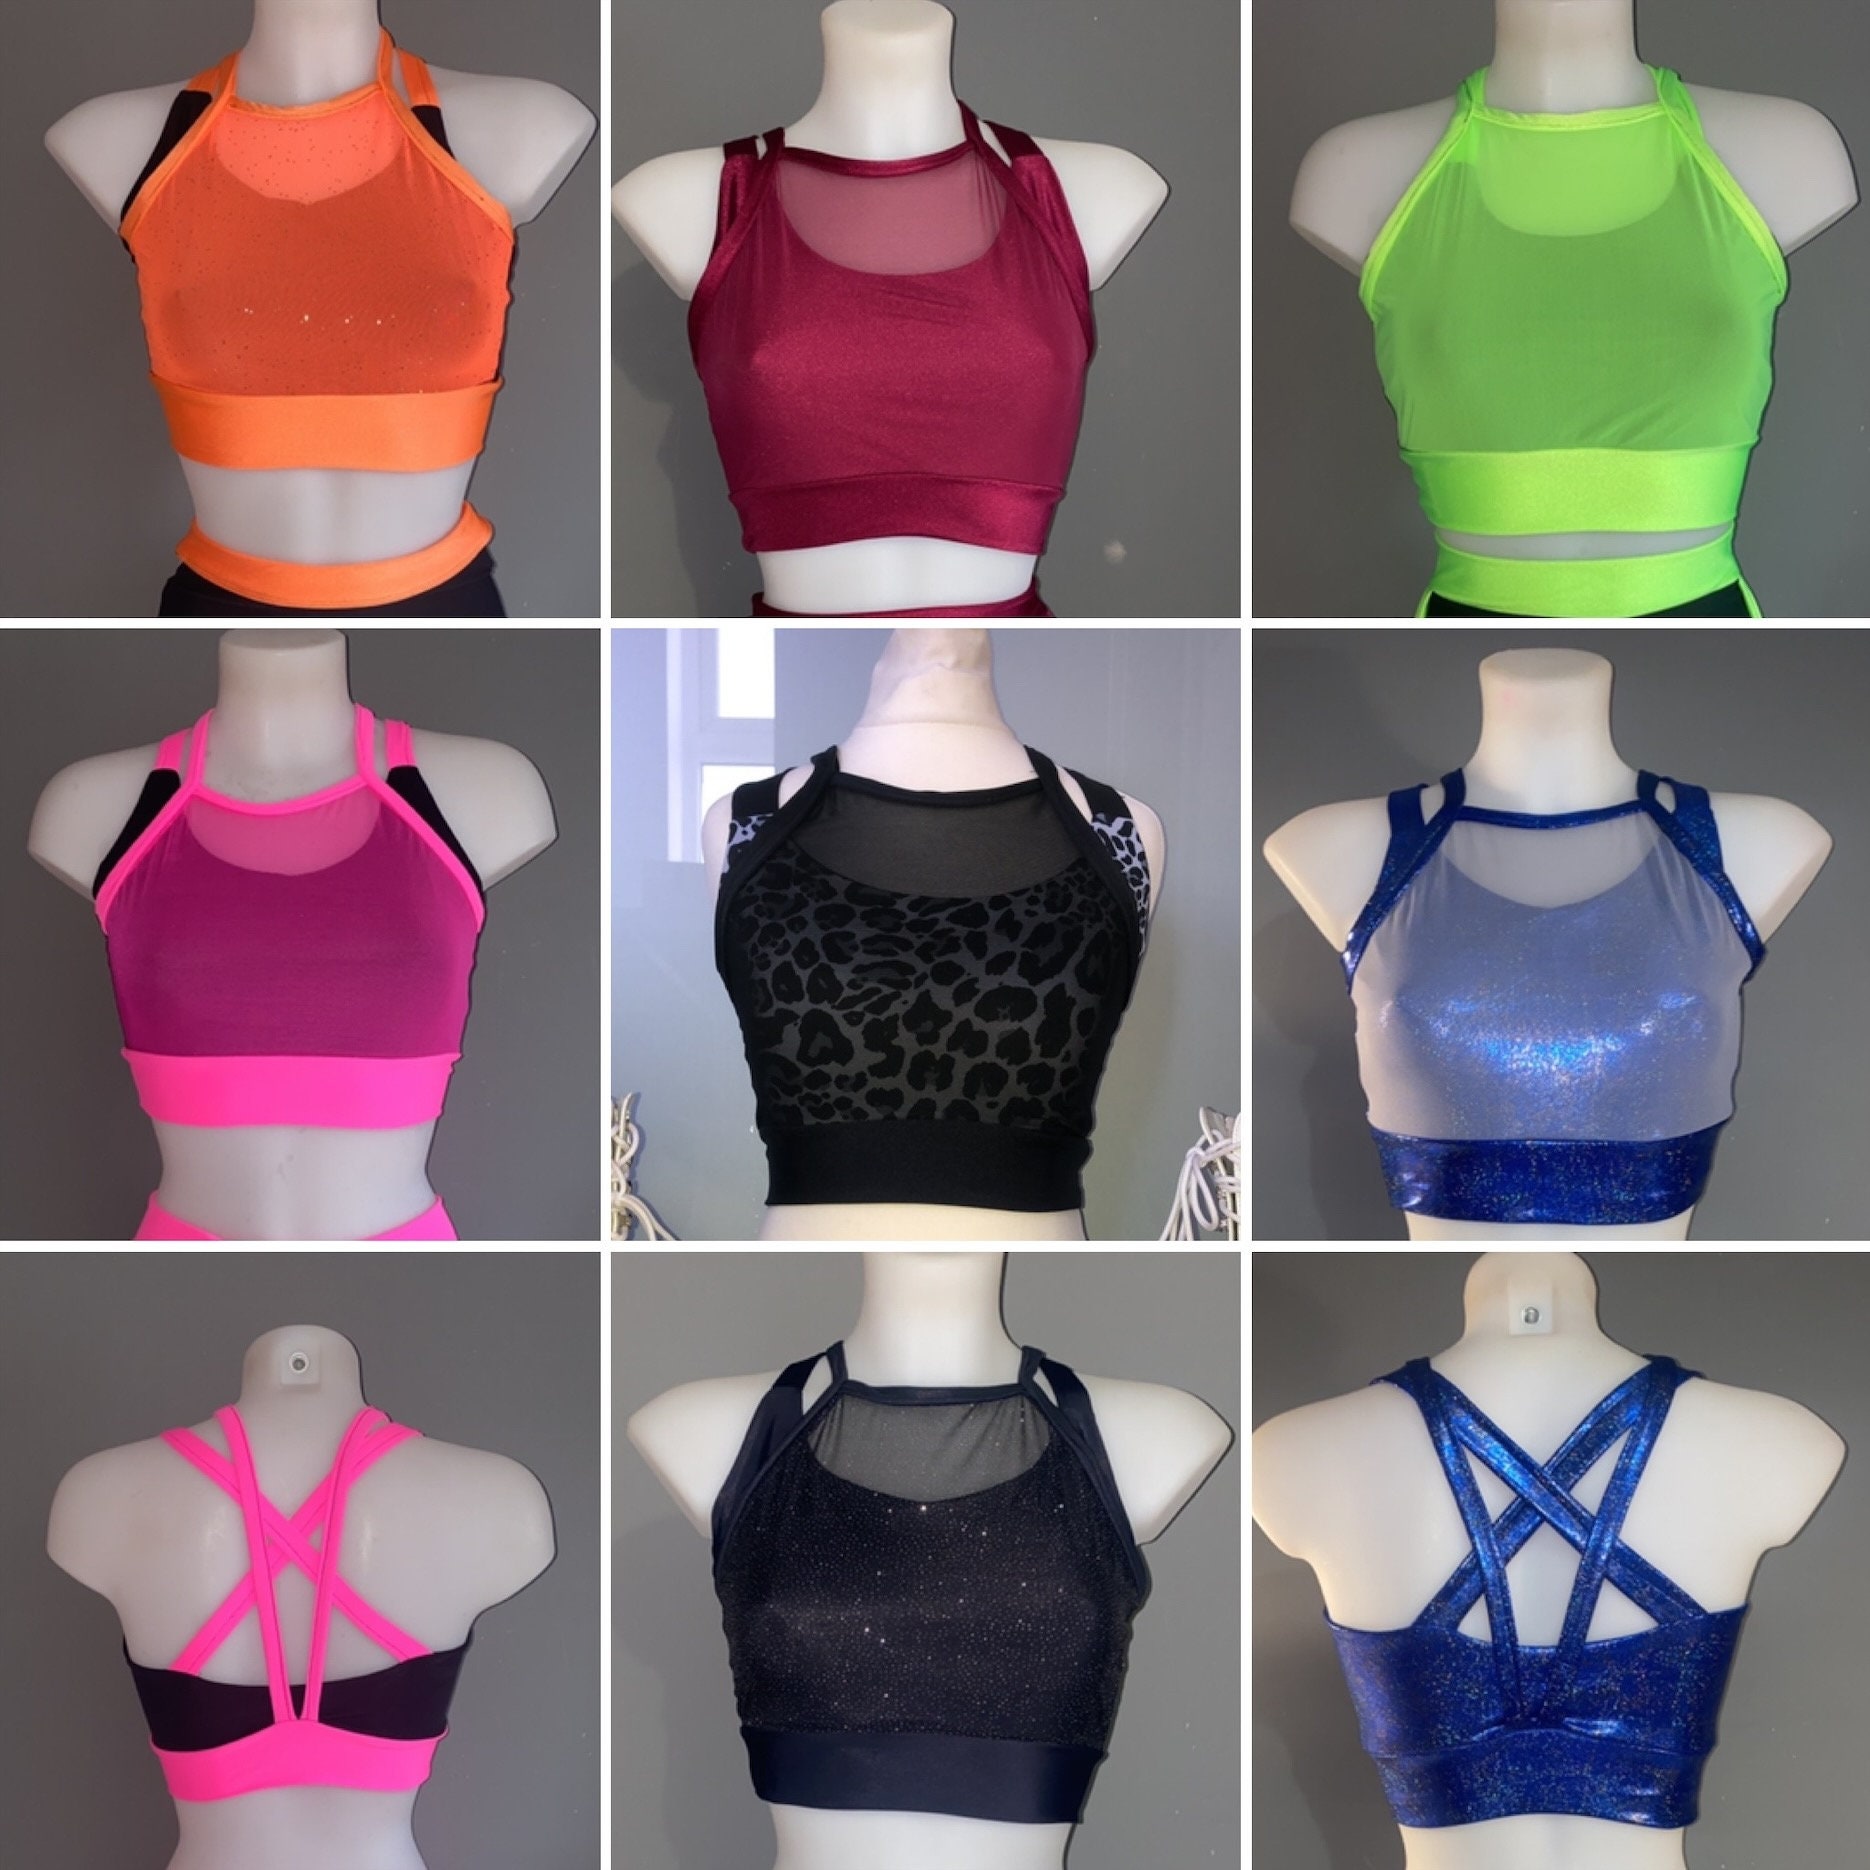 3 Pack High Neck Sports Bras for Women Bra Vest Top Sports Top